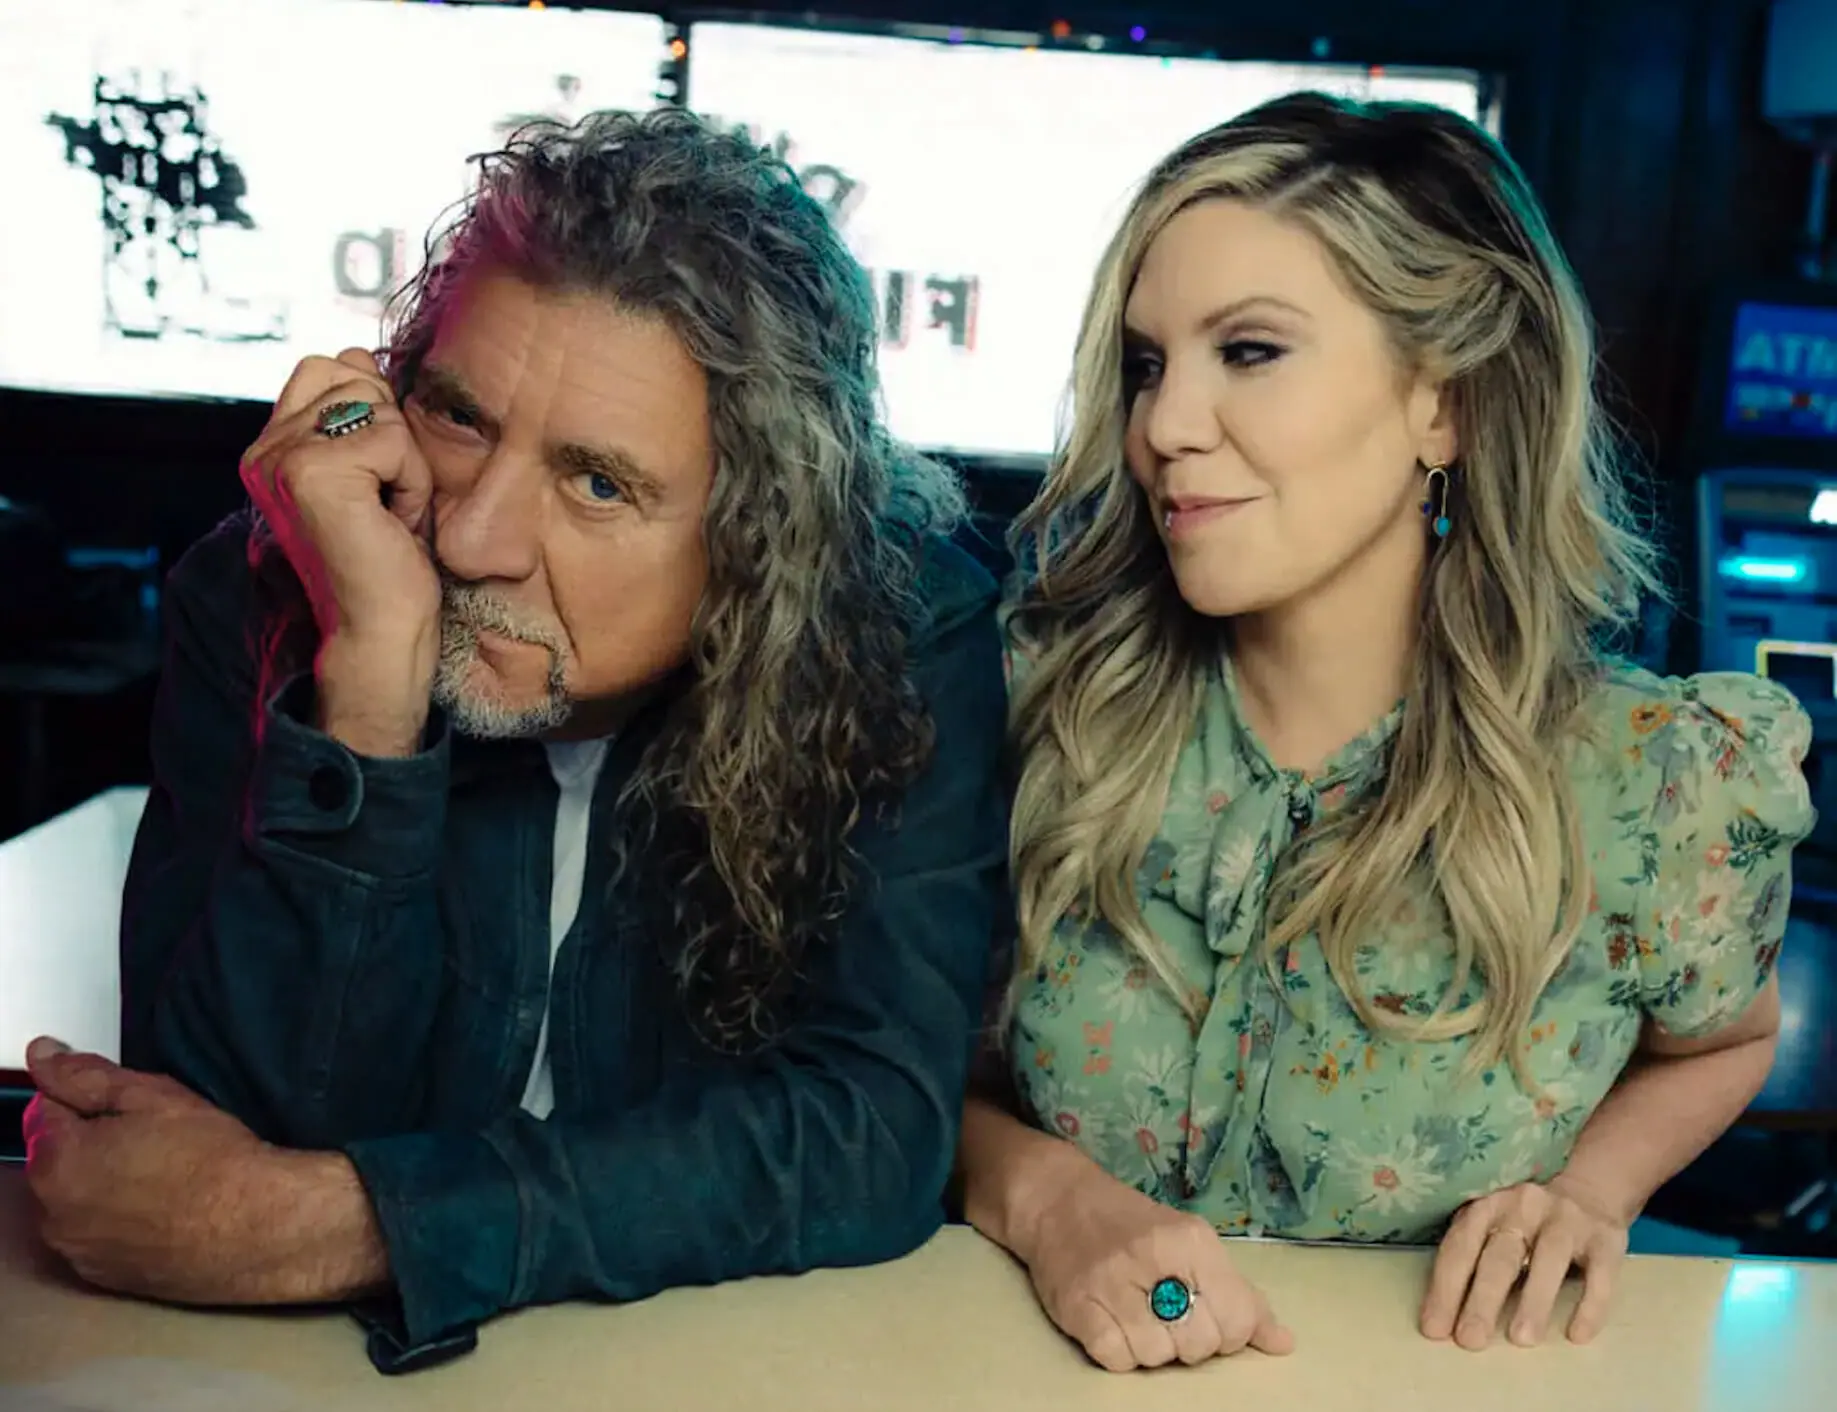 Watch Now: Robert Plant Alison Krauss Revive Led Zeppelin Tracks at Tour